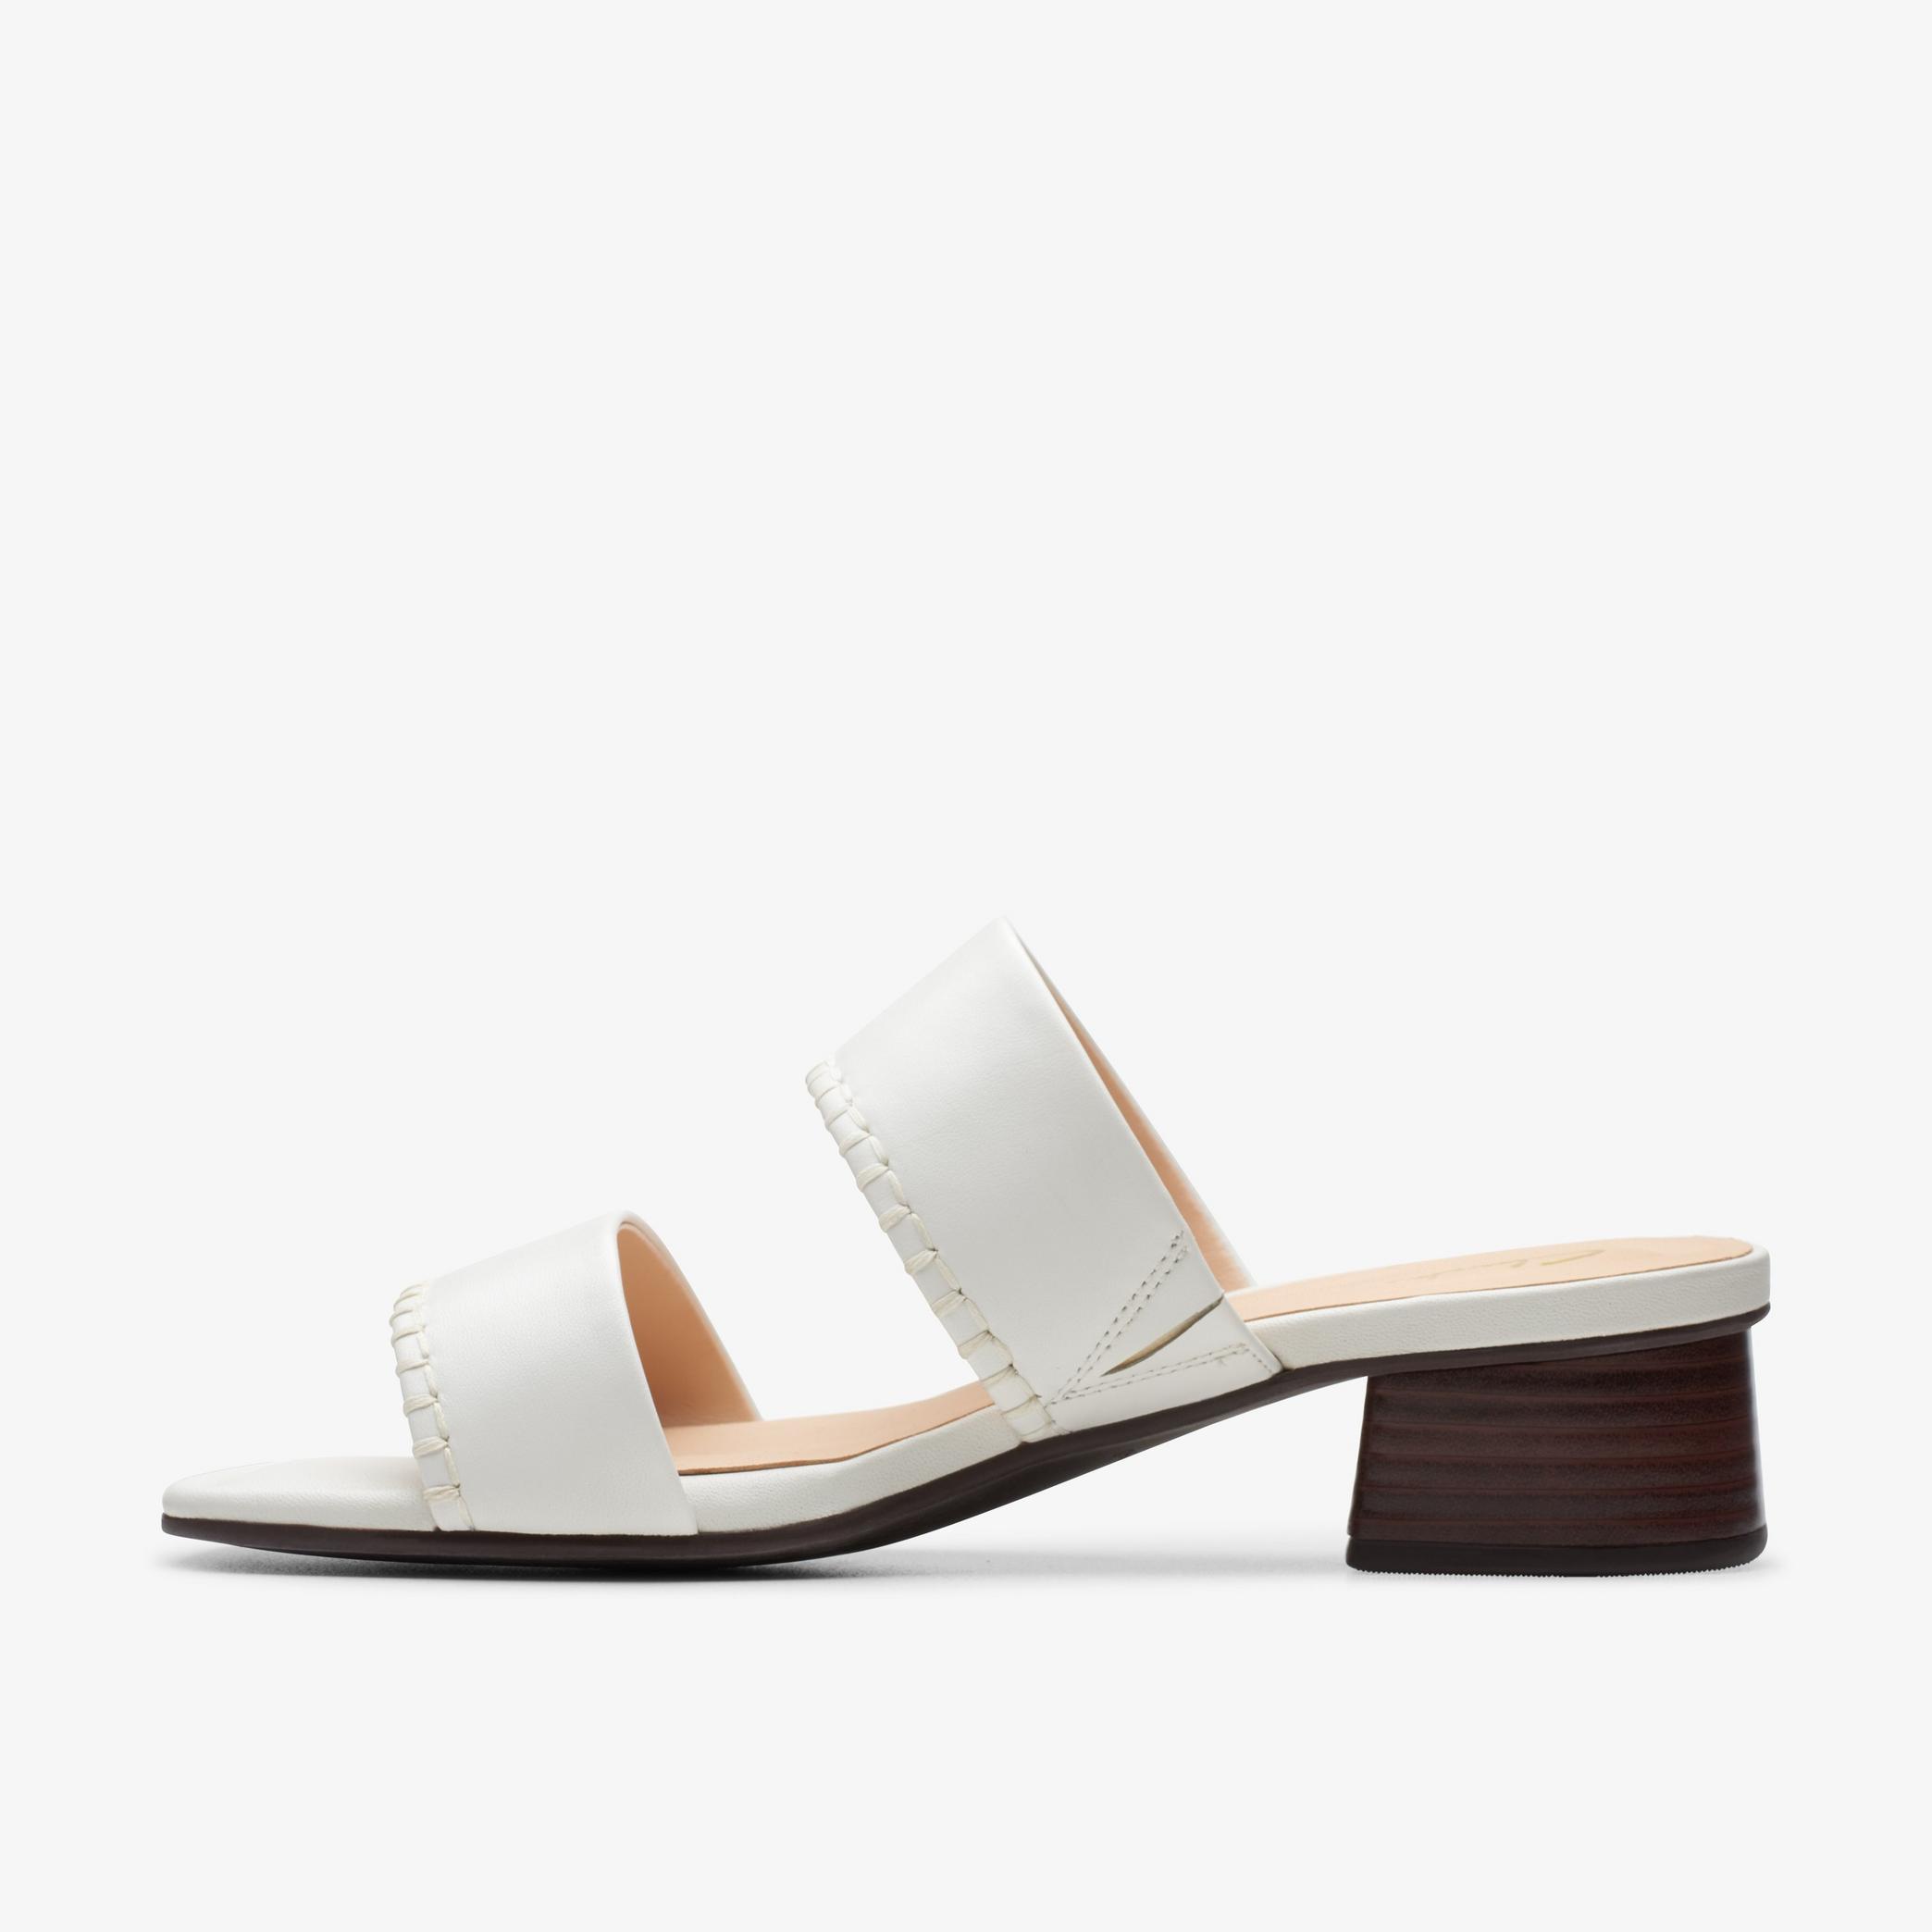 Serina35 Mule Off White Leather Heeled Sandals, view 2 of 6